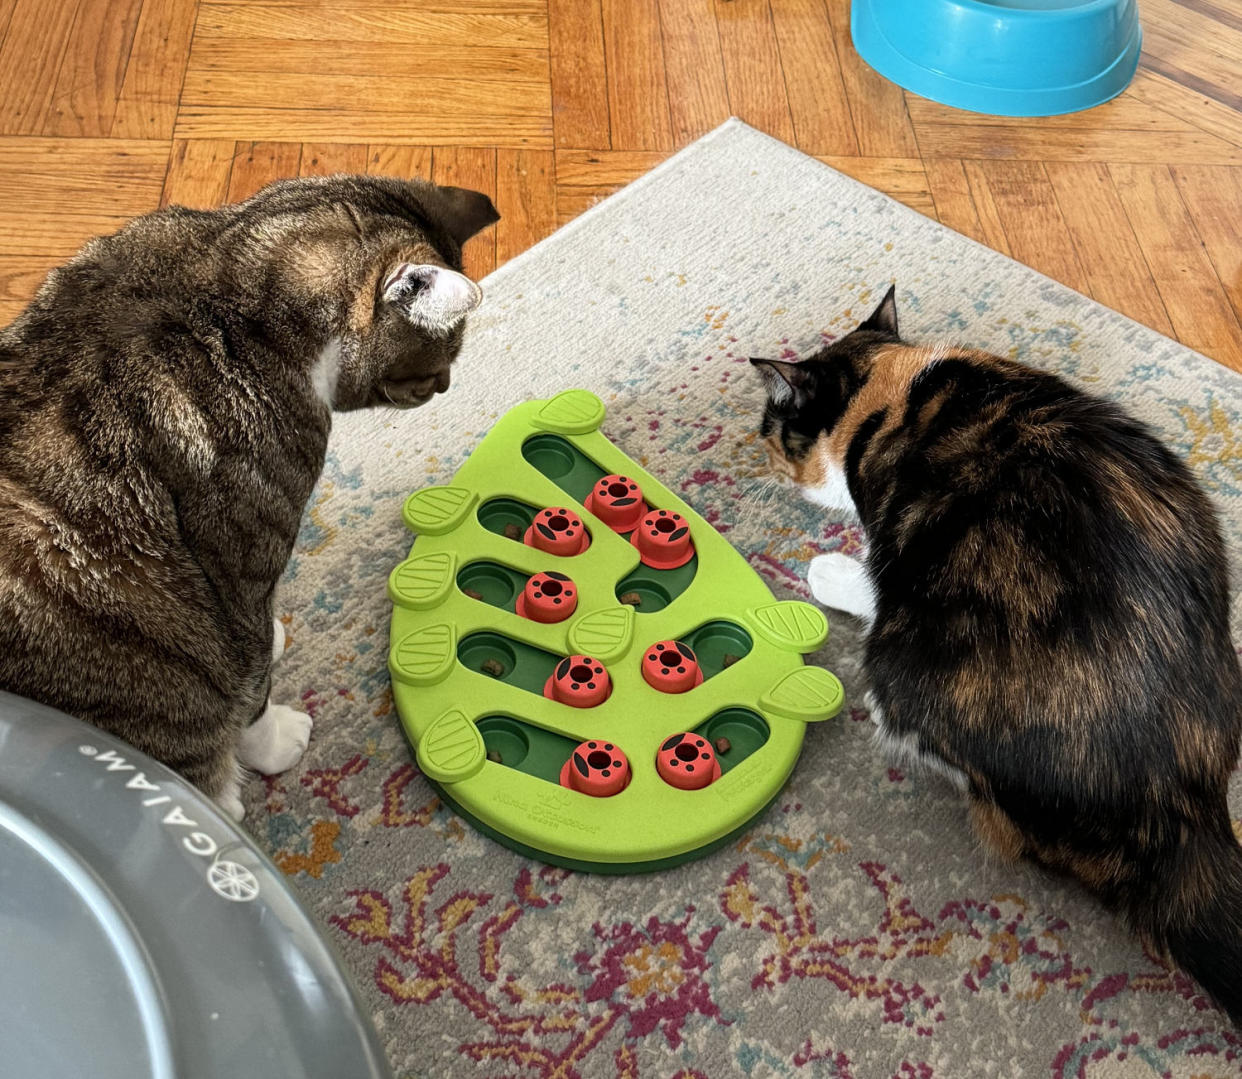 Cats playing with the Catstages by Nina Ottosson Buggin’ Out Puzzle & Play feeder (Courtesy Nikki Brown)